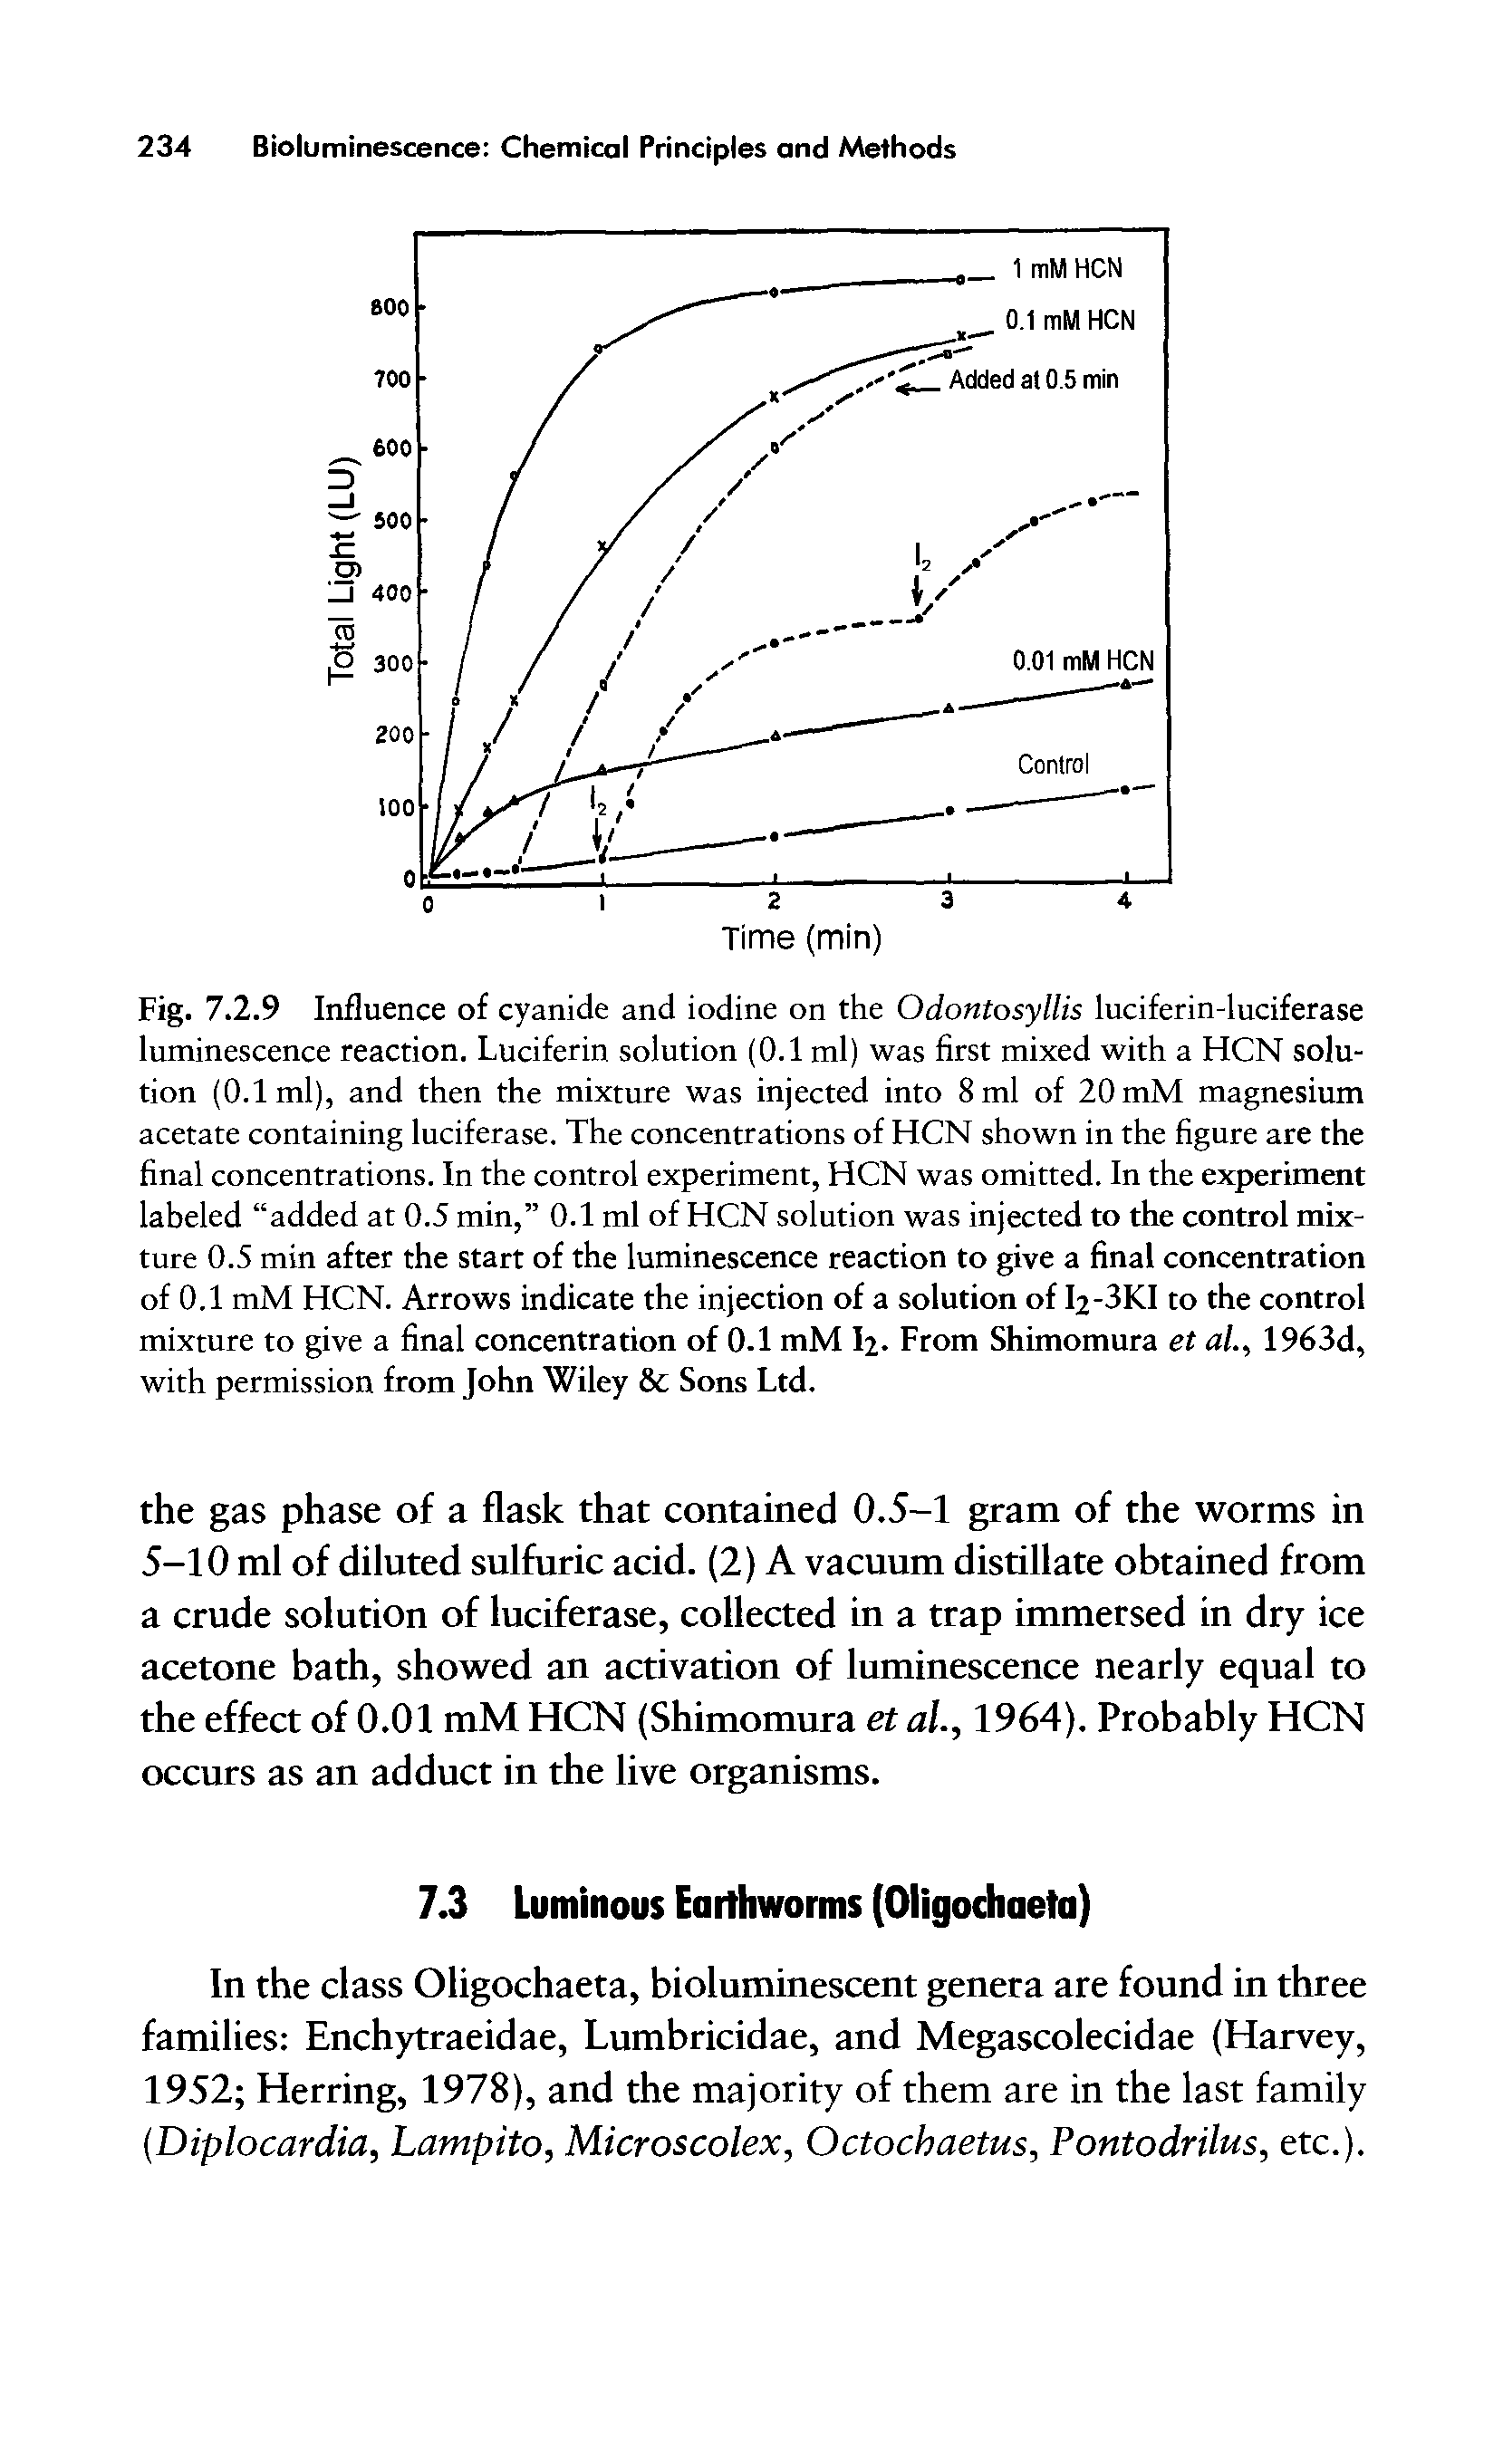 Fig. 7.2.9 Influence of cyanide and iodine on the Odontosyllis luciferin-luciferase luminescence reaction. Luciferin solution (0.1 ml) was first mixed with a HCN solution (0.1ml), and then the mixture was injected into 8 ml of 20 mM magnesium acetate containing luciferase. The concentrations of HCN shown in the figure are the final concentrations. In the control experiment, HCN was omitted. In the experiment labeled added at 0.5 min, 0.1 ml of HCN solution was injected to the control mixture 0.5 min after the start of the luminescence reaction to give a final concentration of 0.1 mM HCN. Arrows indicate the injection of a solution of I2-3KI to the control mixture to give a final concentration of 0.1 mM I2. From Shimomura et al., 1963d, with permission from John Wiley Sons Ltd.